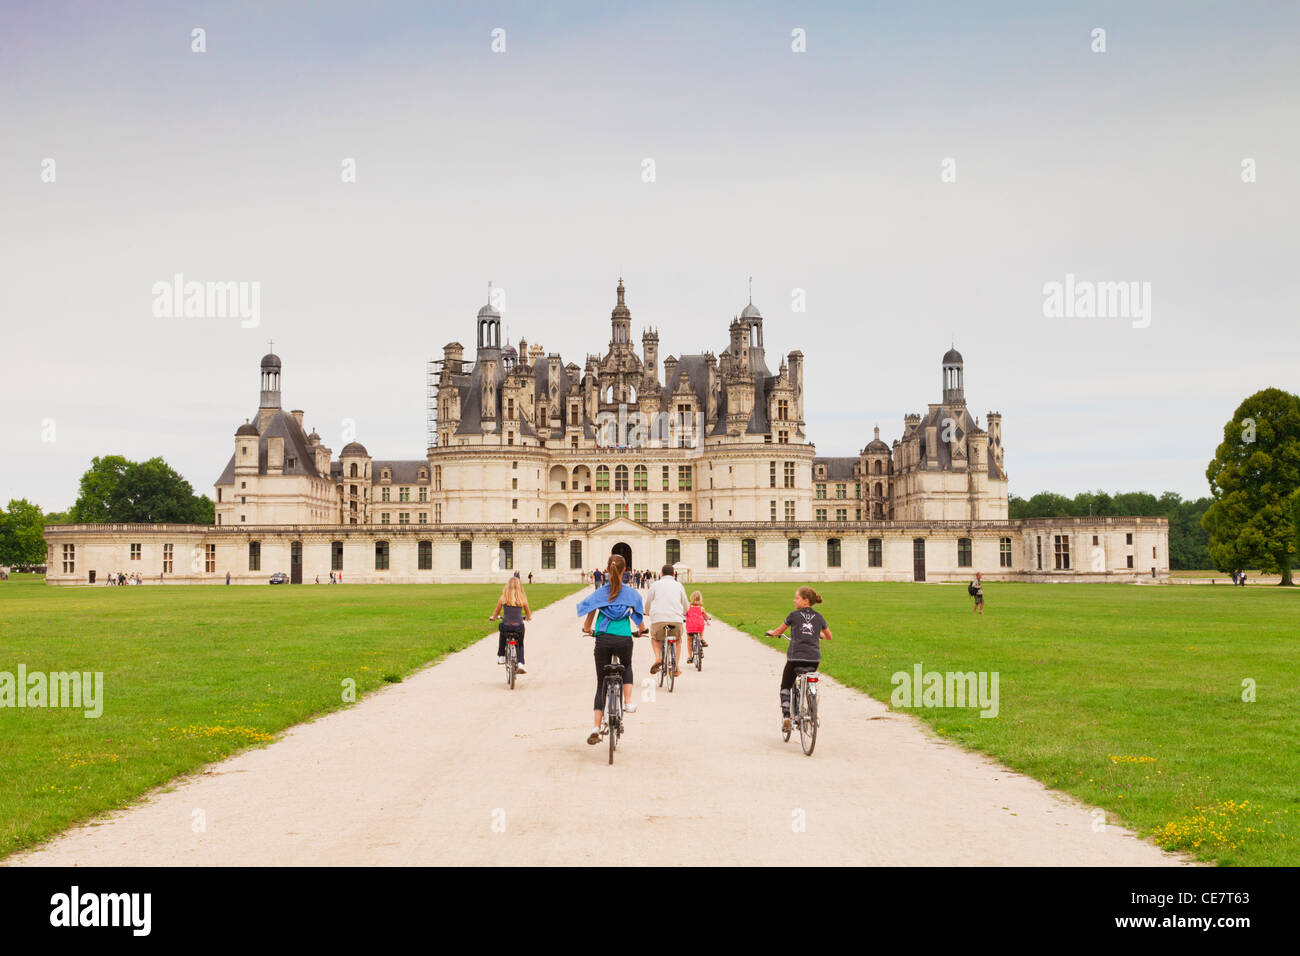 The chateau at Chambord, Loire Valley, France, and a group of cyclists approaching it. Stock Photo